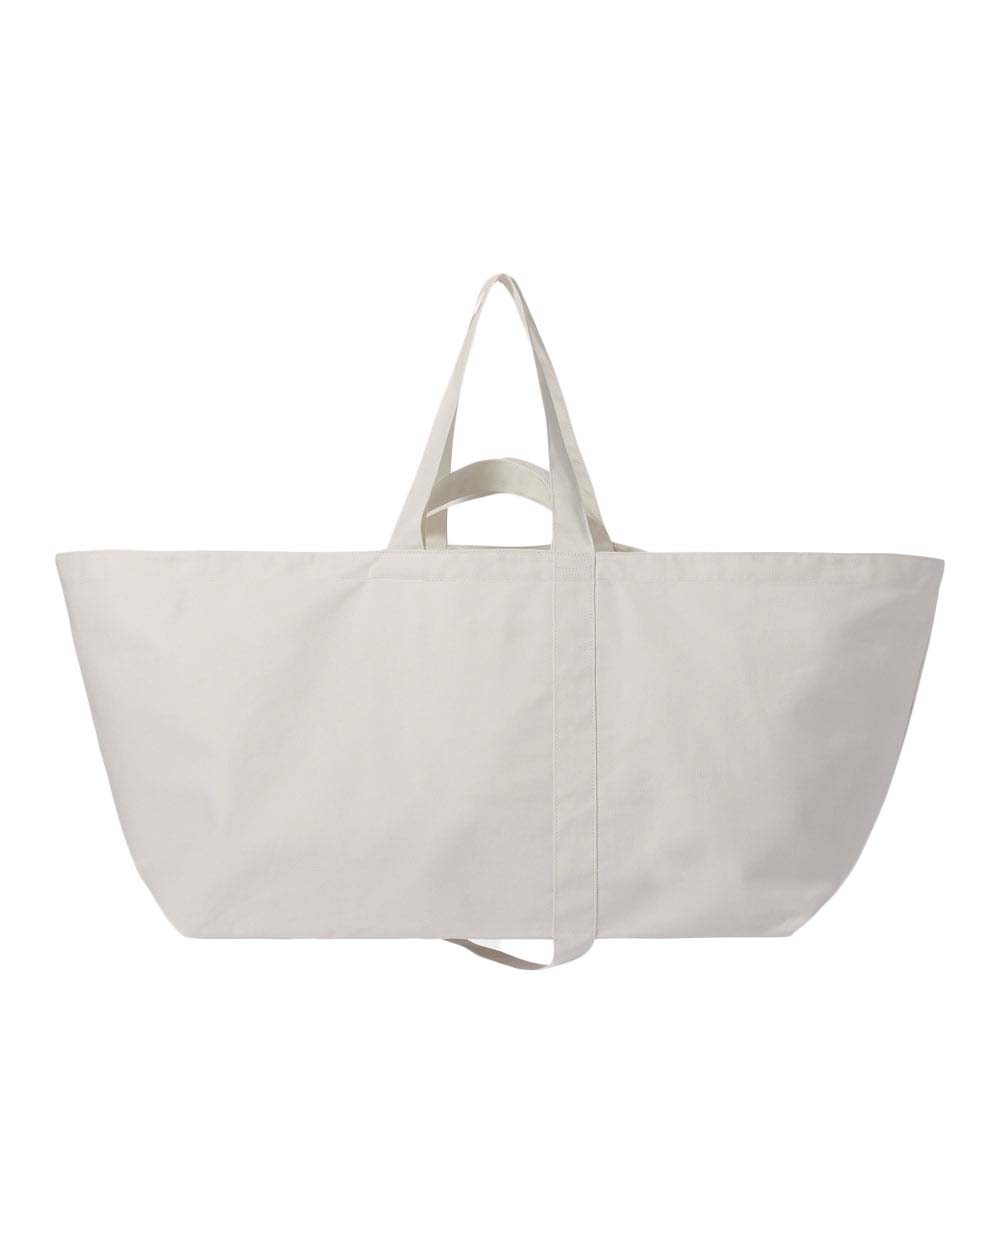 Carhartt WIP x RAMIDUS Tote Bag XL WIP White in Cotton - US